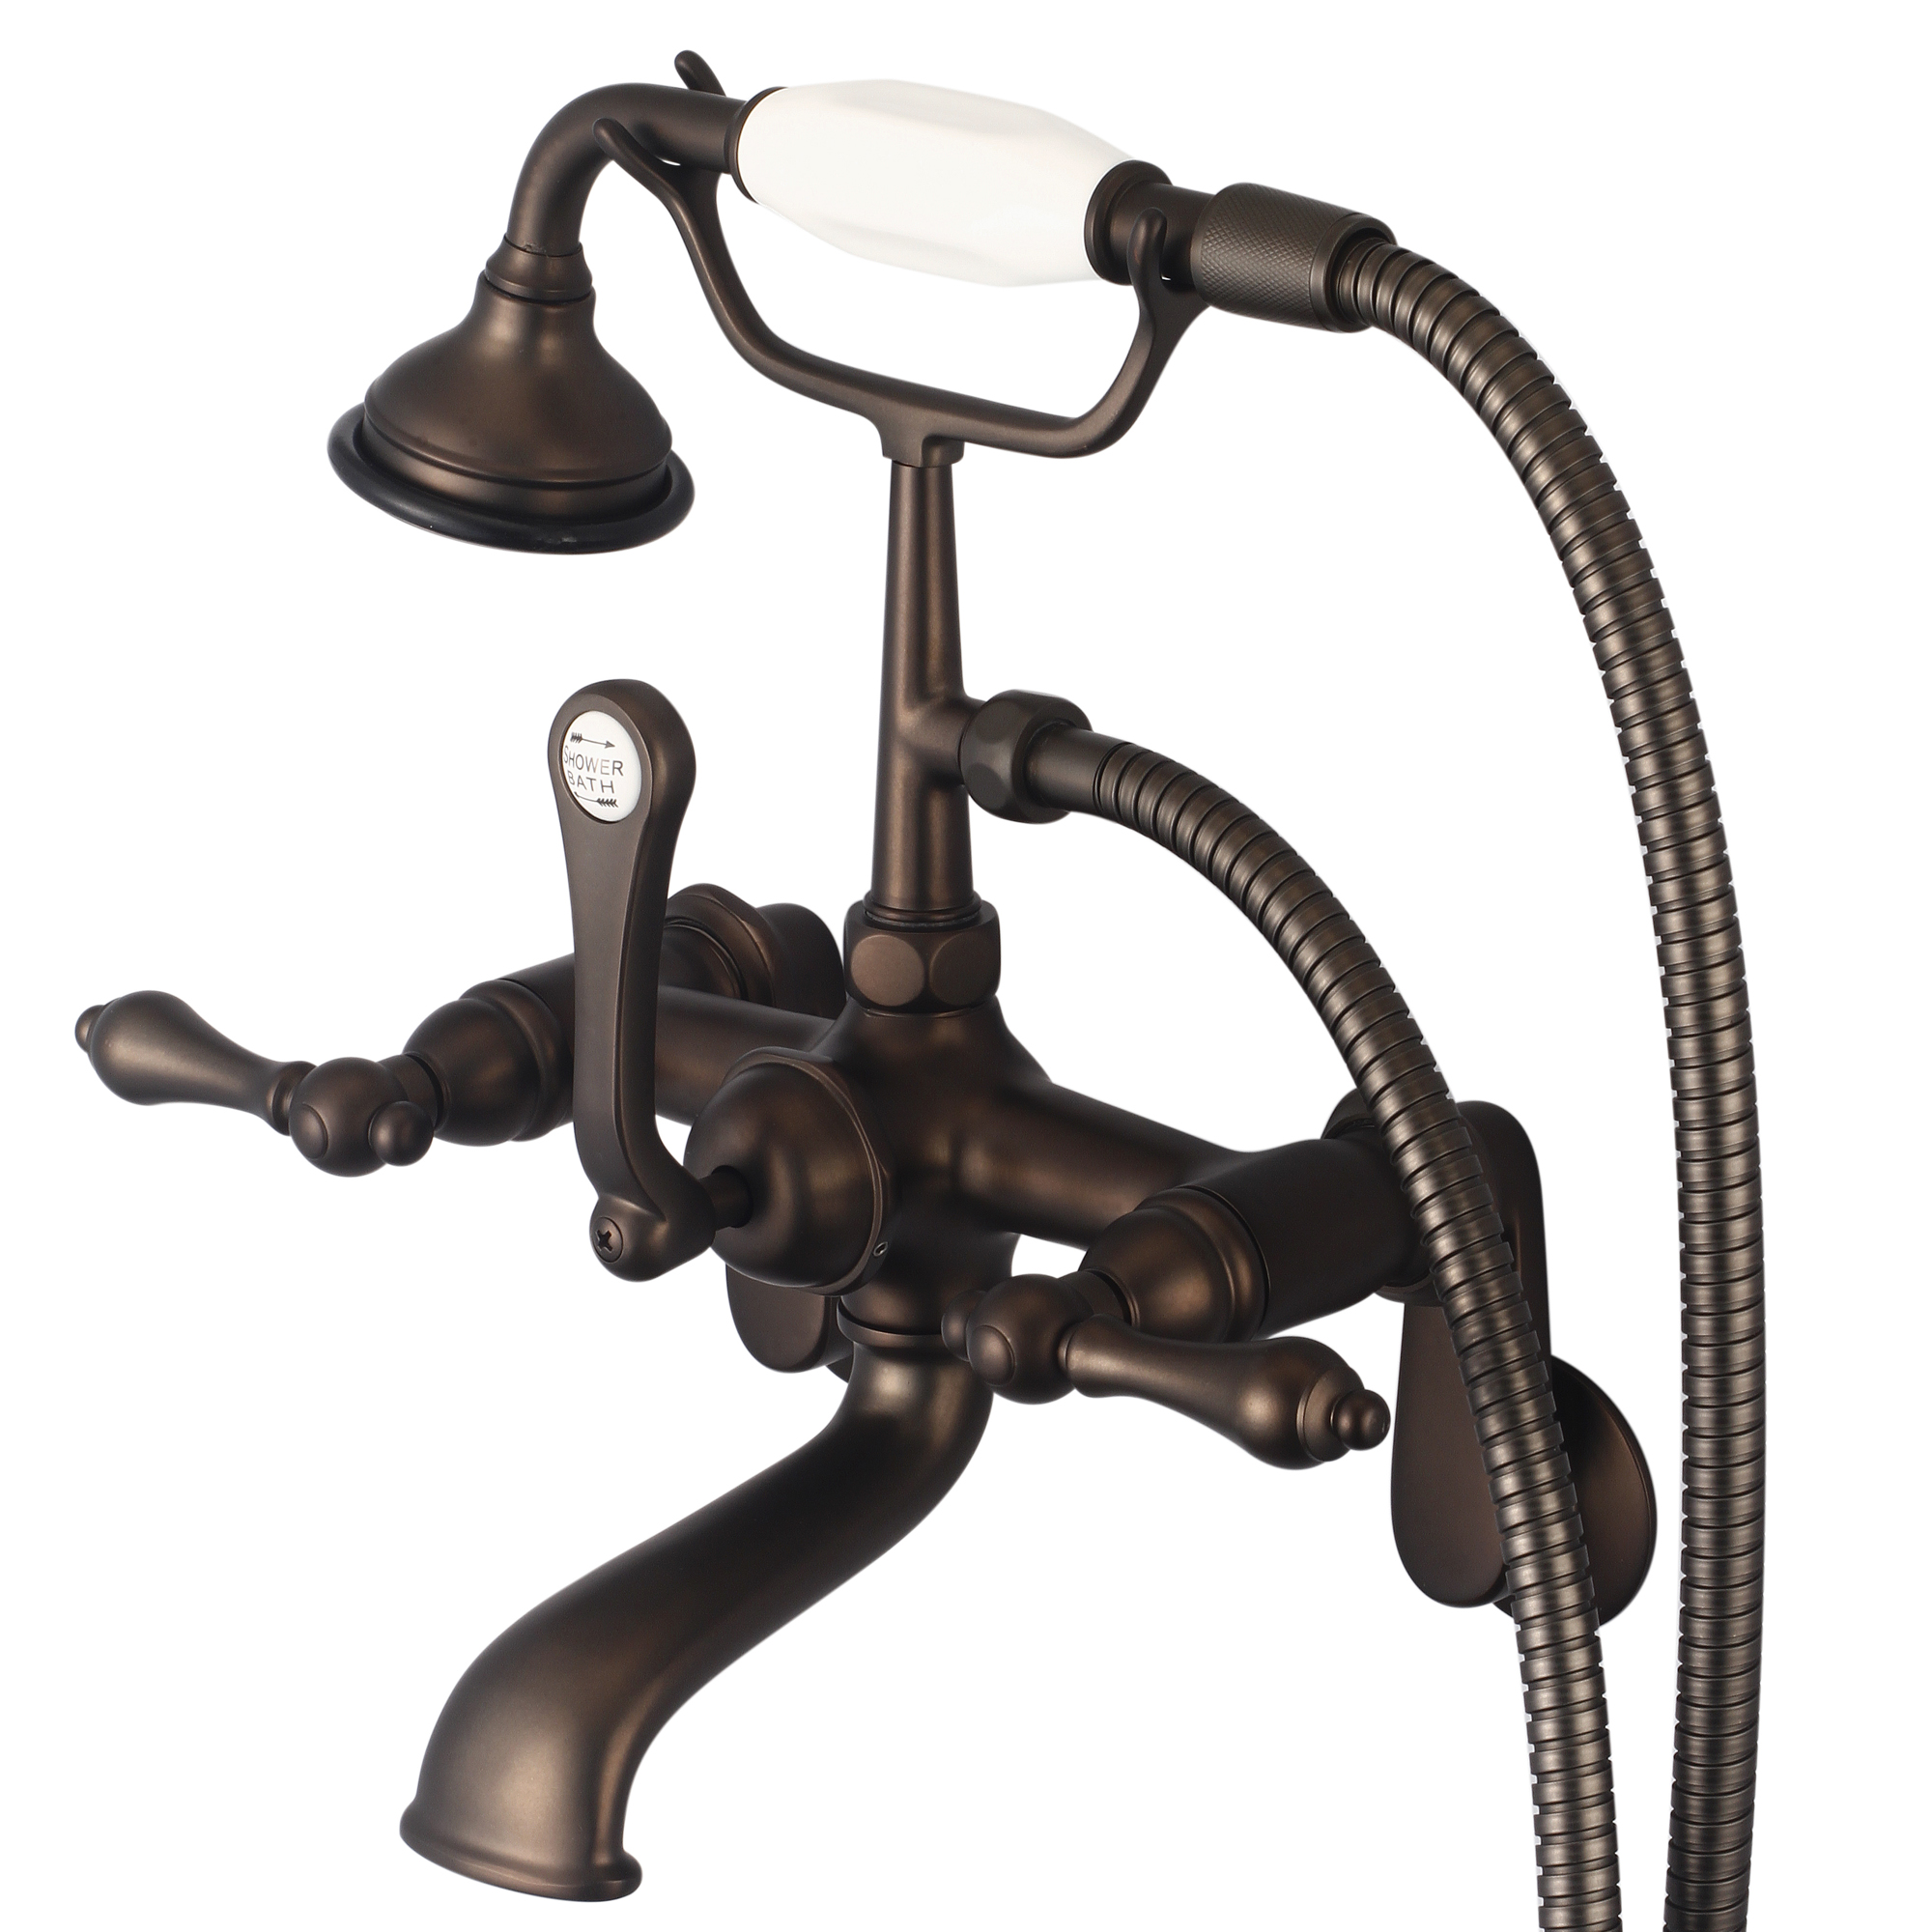 Vintage Classic Adjustable Center Wall Mount Tub Faucet With Swivel Wall Connector & Handheld Shower in Oil-rubbed Bronze Finish Finish With Metal Lever Handles Without Labels